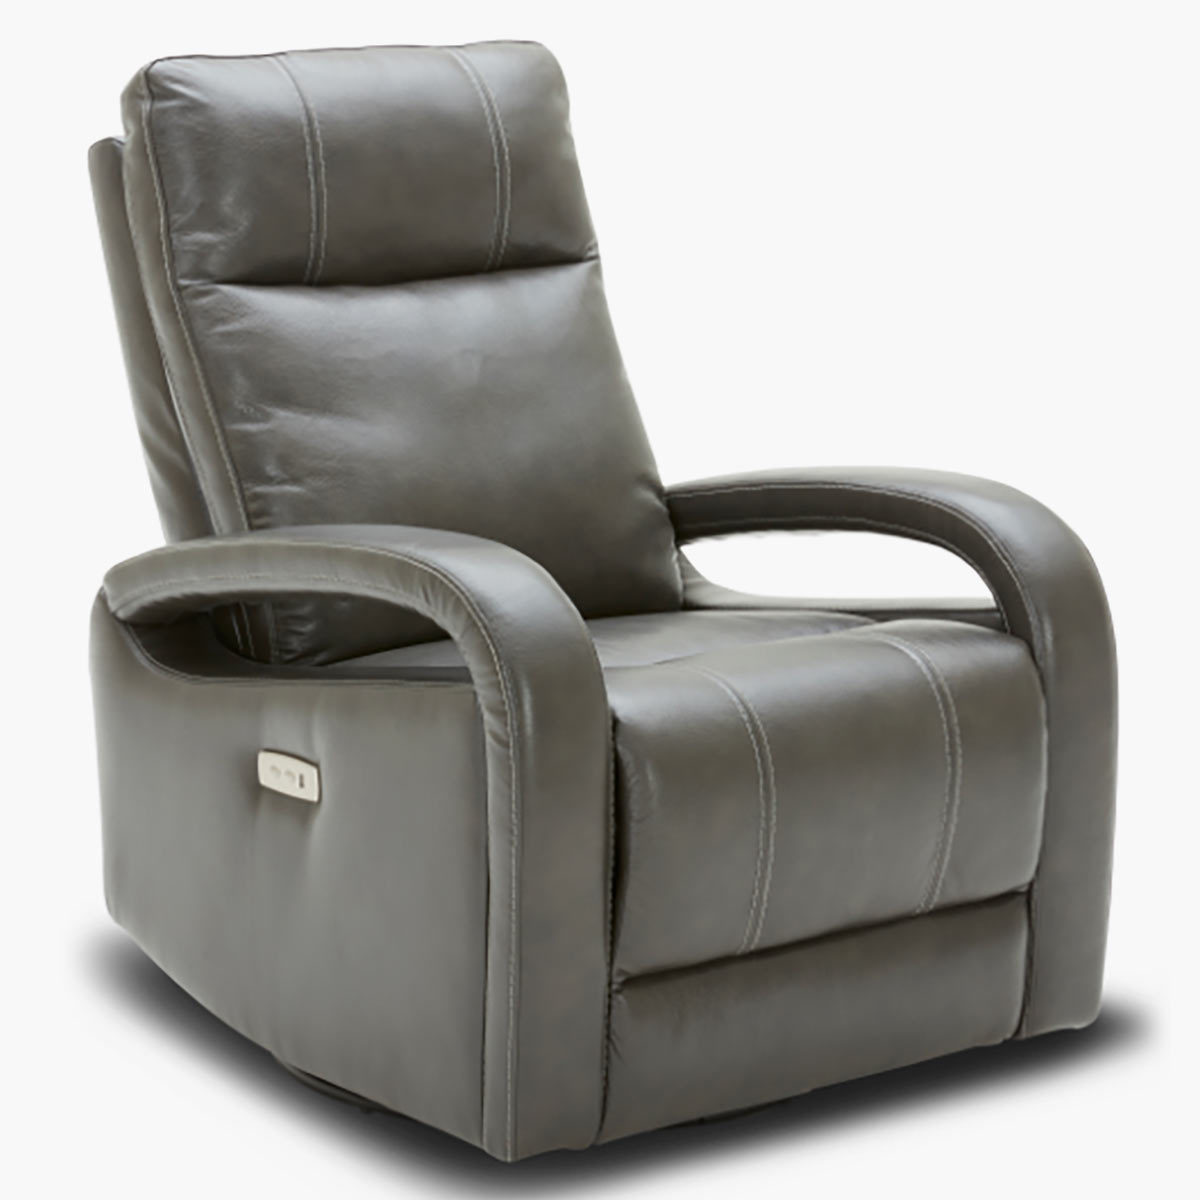 New Leather Chair Recliner Costco with Simple Decor